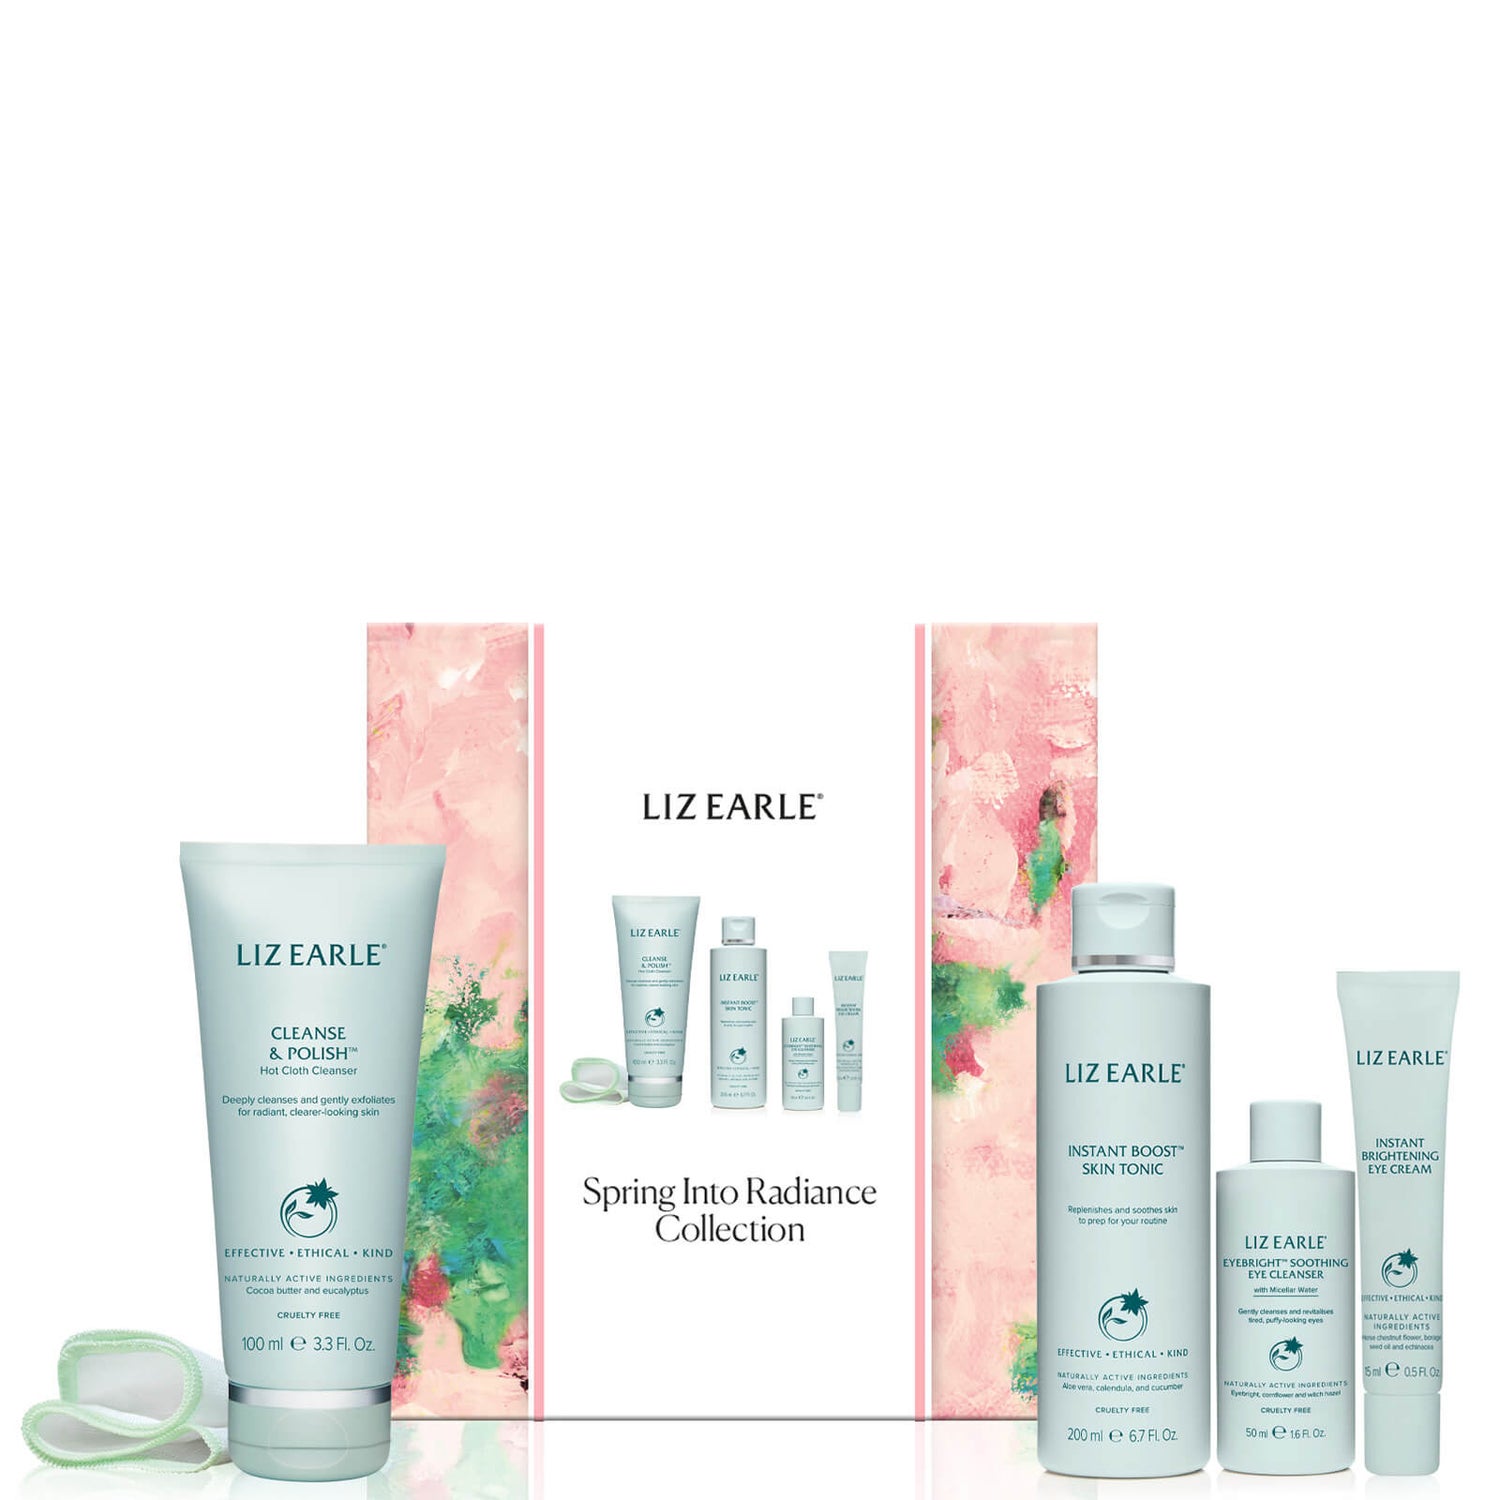 Liz Earle Spring Into Radiance Collection 365ml (Worth £60.00)